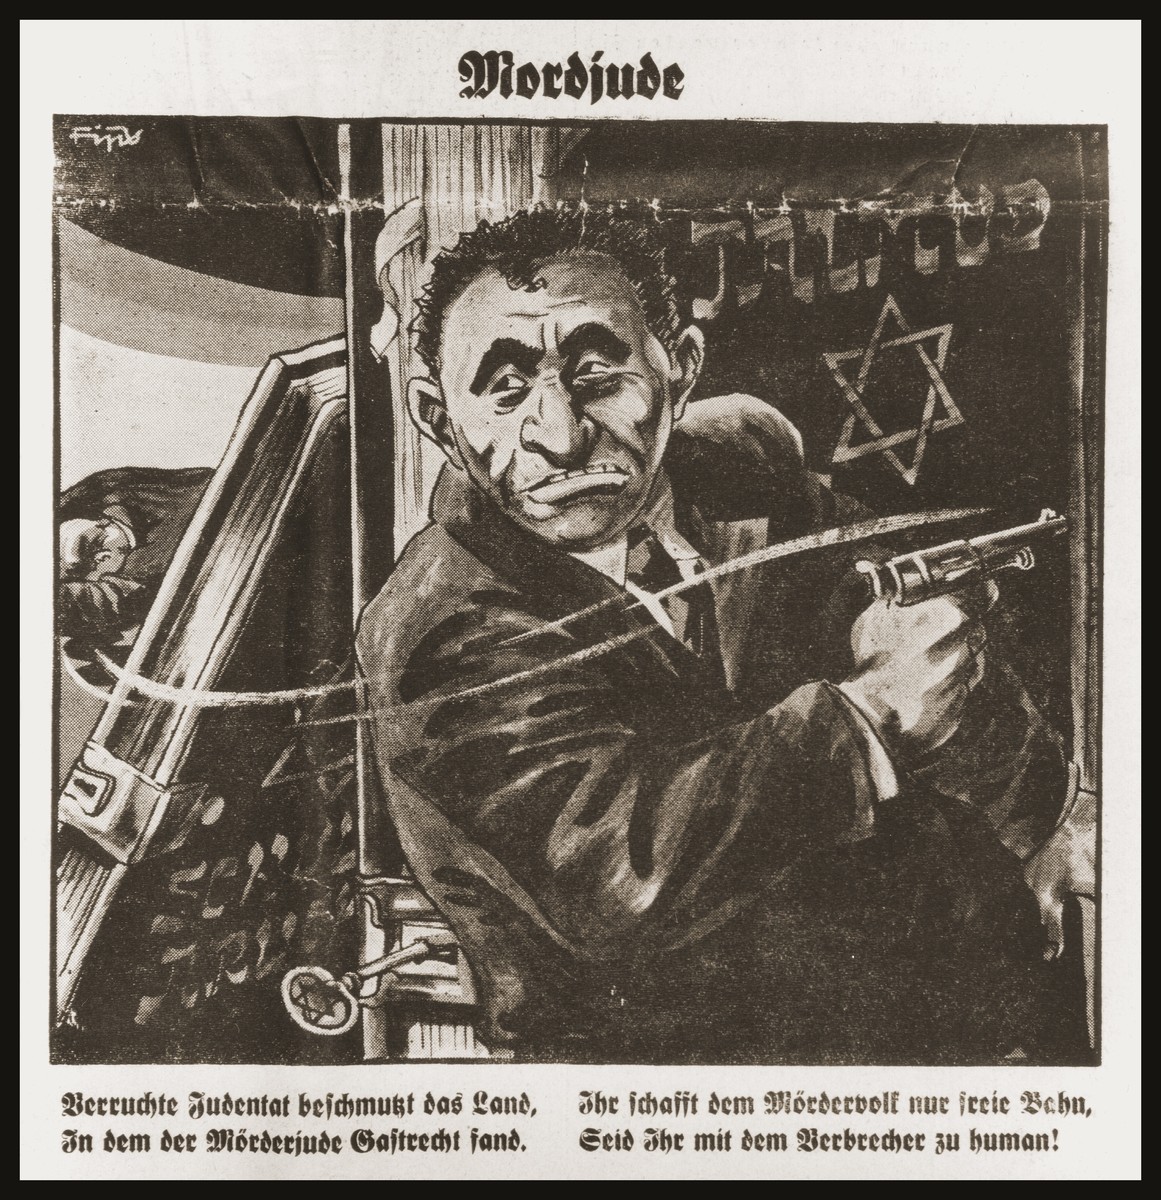 Caricature on the front page of the Nazi publication, Der Stuermer, of Herschel Grynszpan, the Jewish assassin of Ernst vom Roth.  The caption reads, "Jewish Murderer/Despicable Jewish deeds besmirch the land/In which the Jewish murderer was accorded the rights of a guest/You have given the murderous people a free path/If you treat the criminal like a human being!"